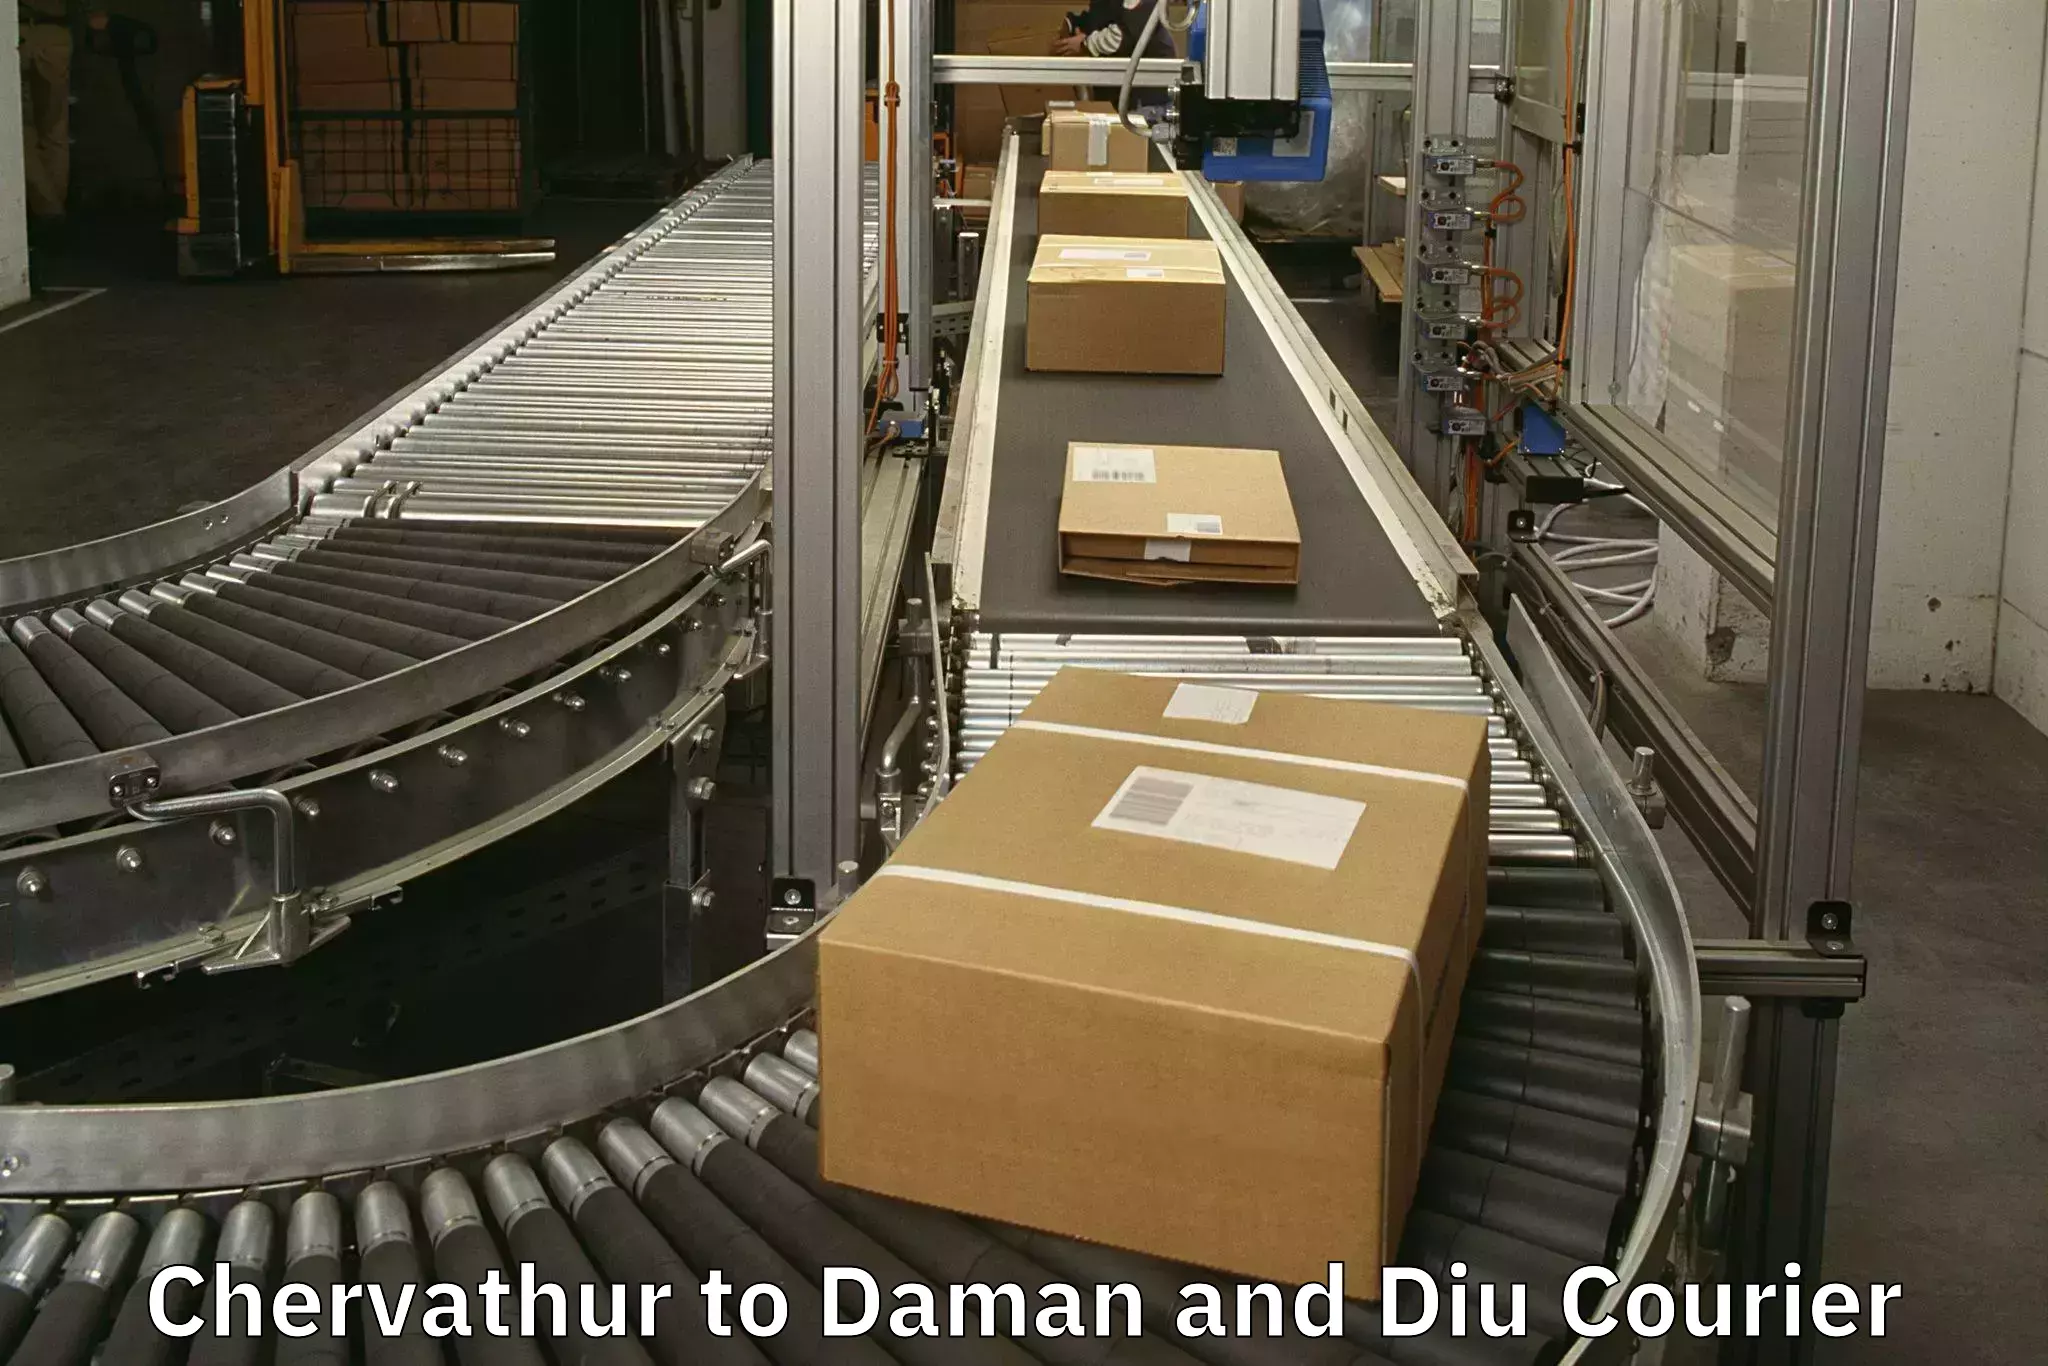 Luggage transport solutions Chervathur to Daman and Diu